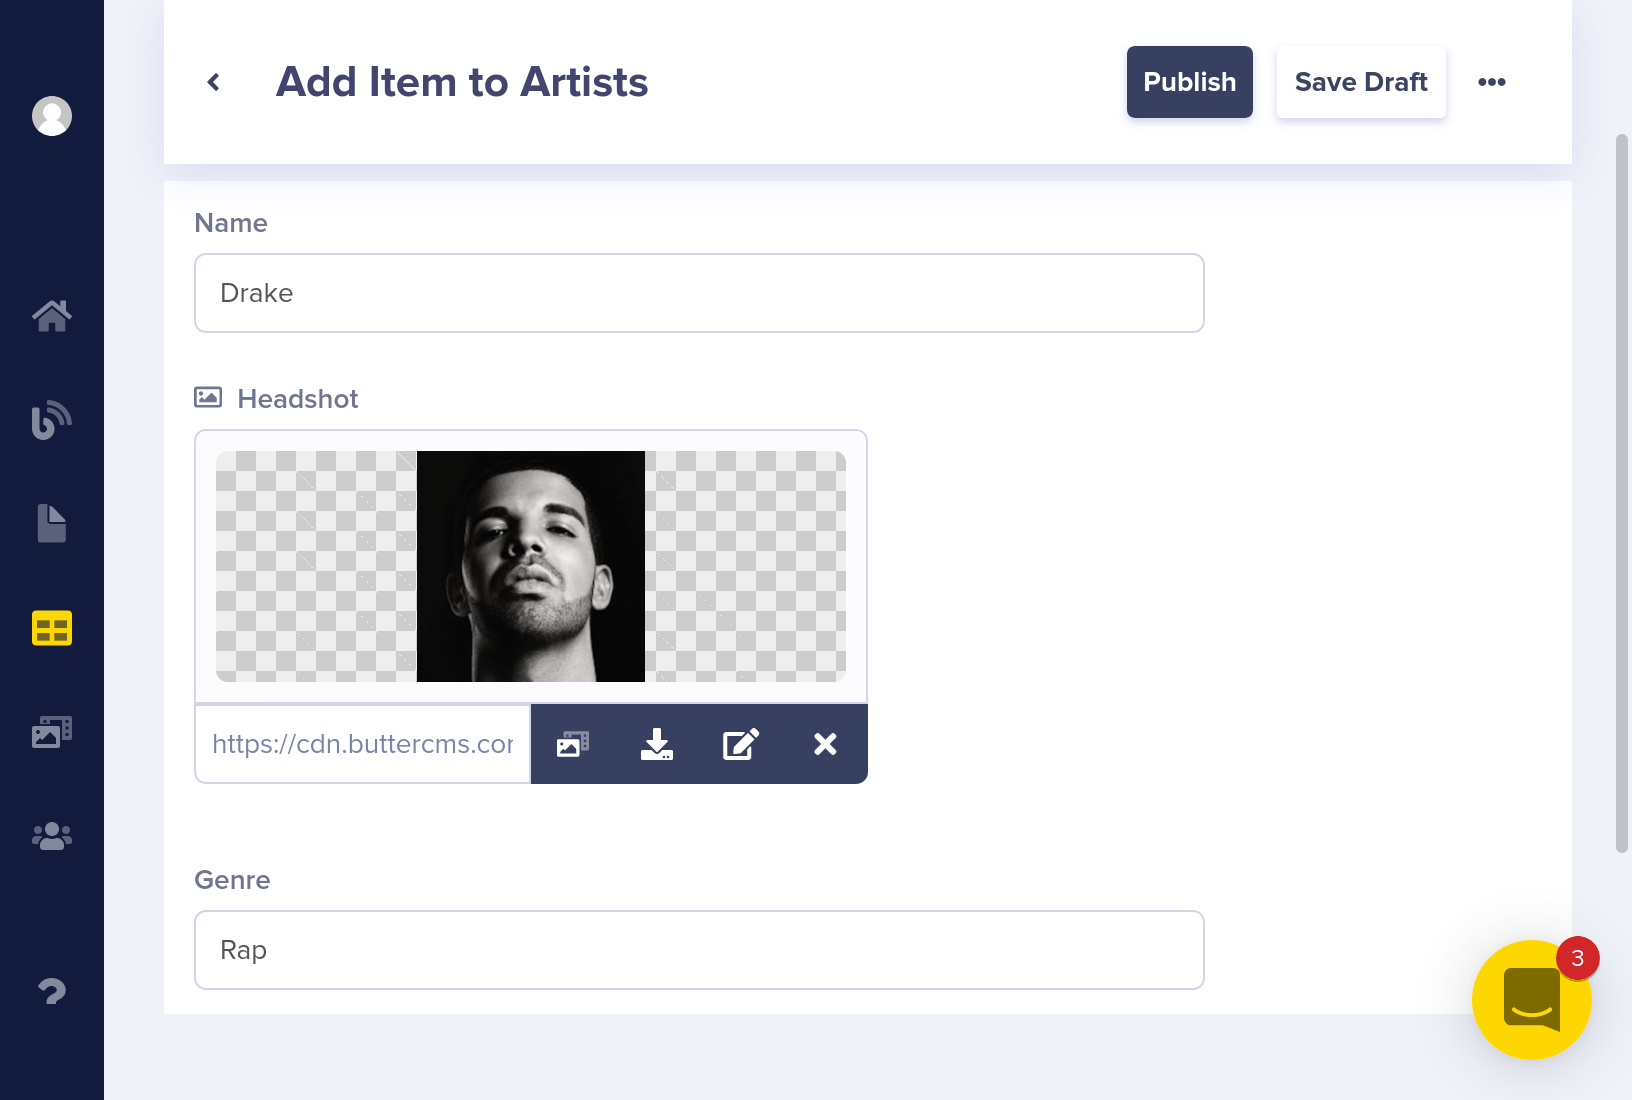 Adding Drake to Artists collection